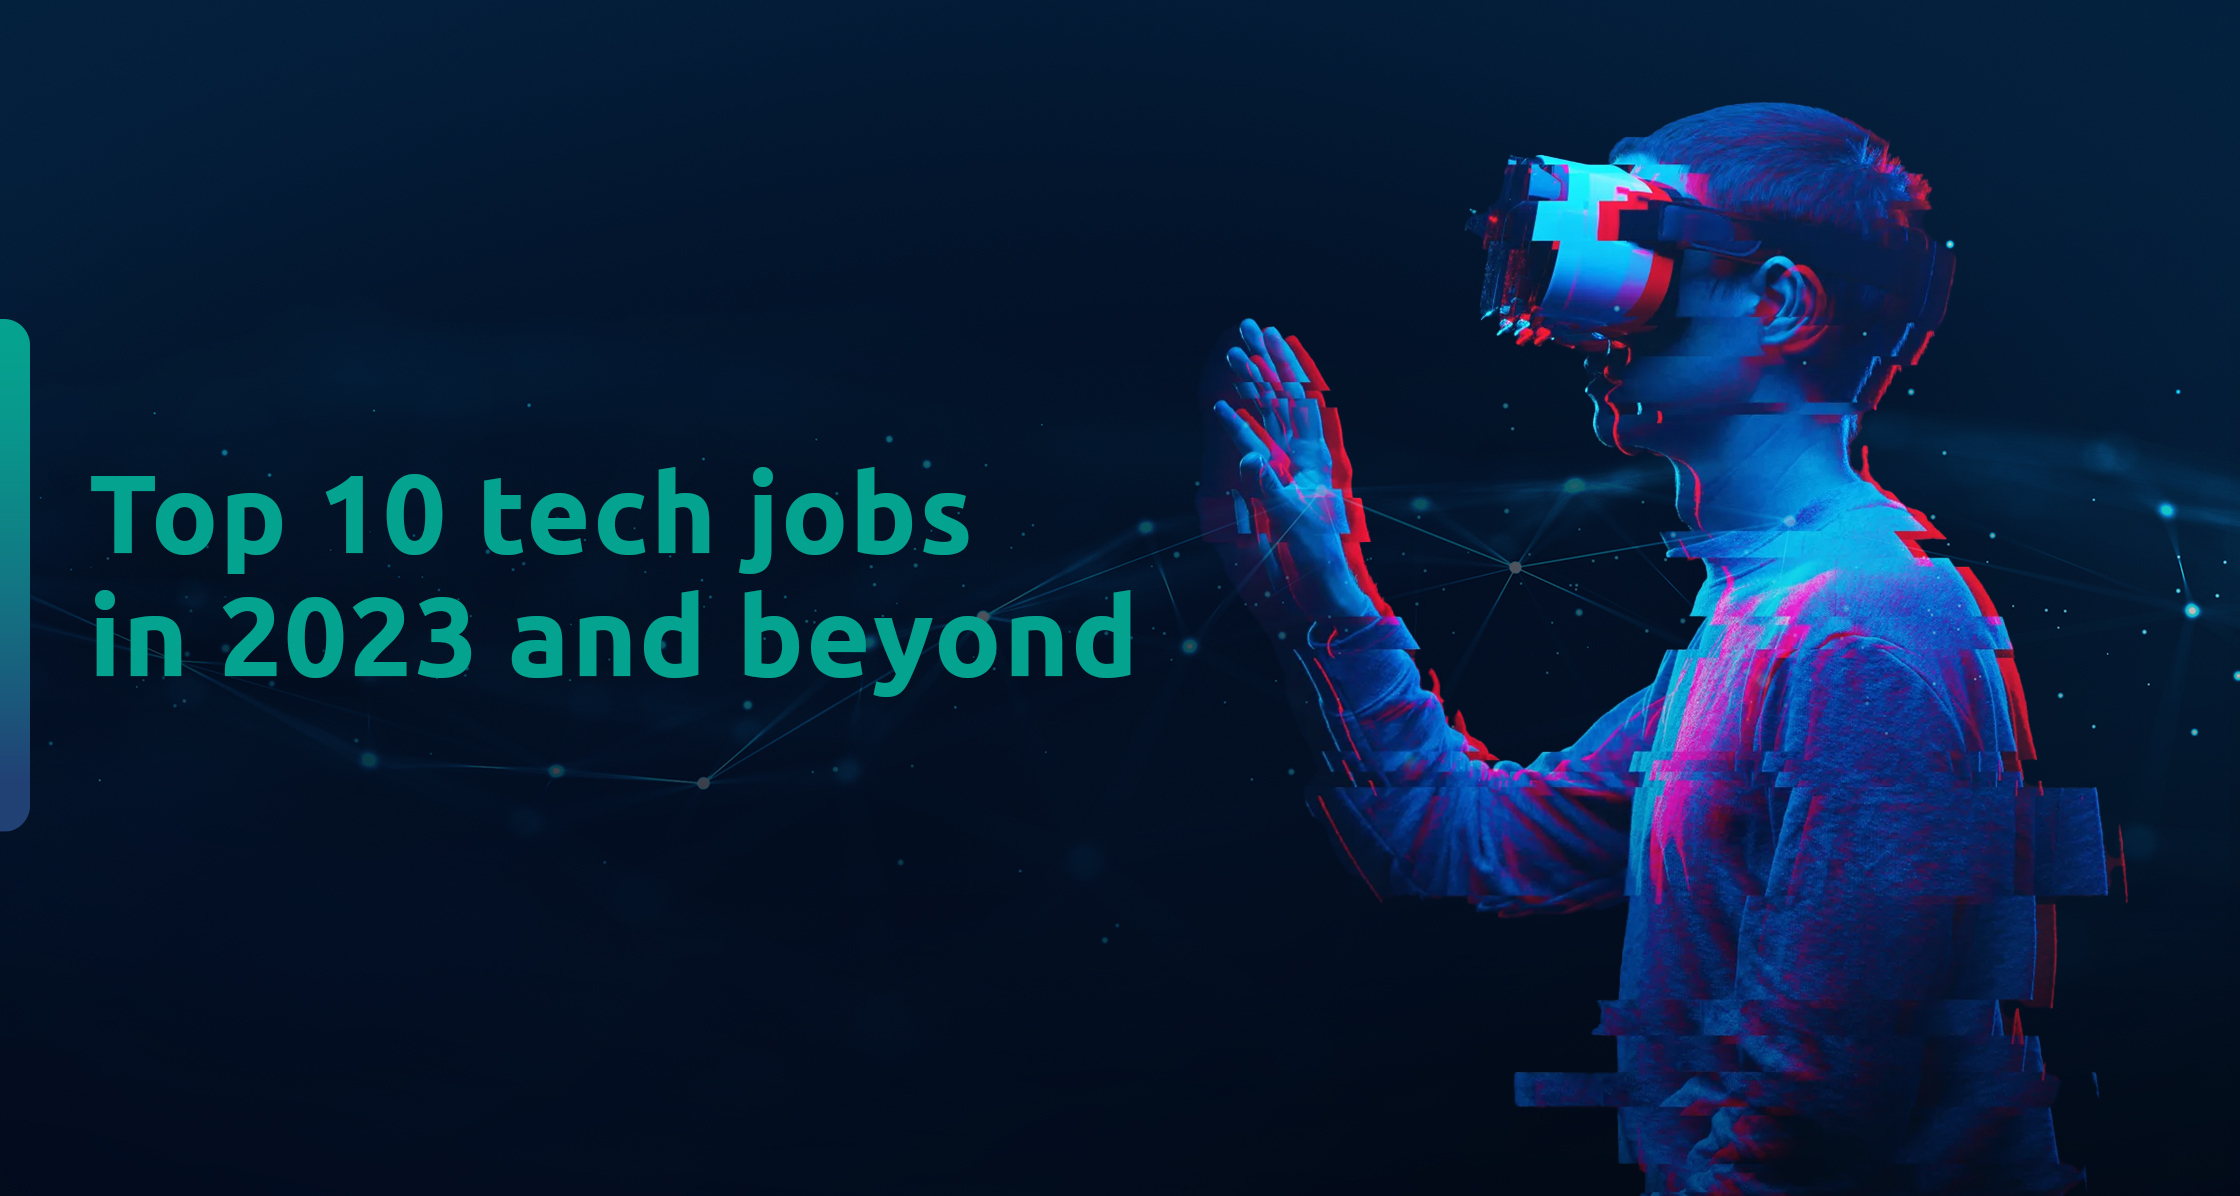 Top 10 tech jobs in 2023 and beyond